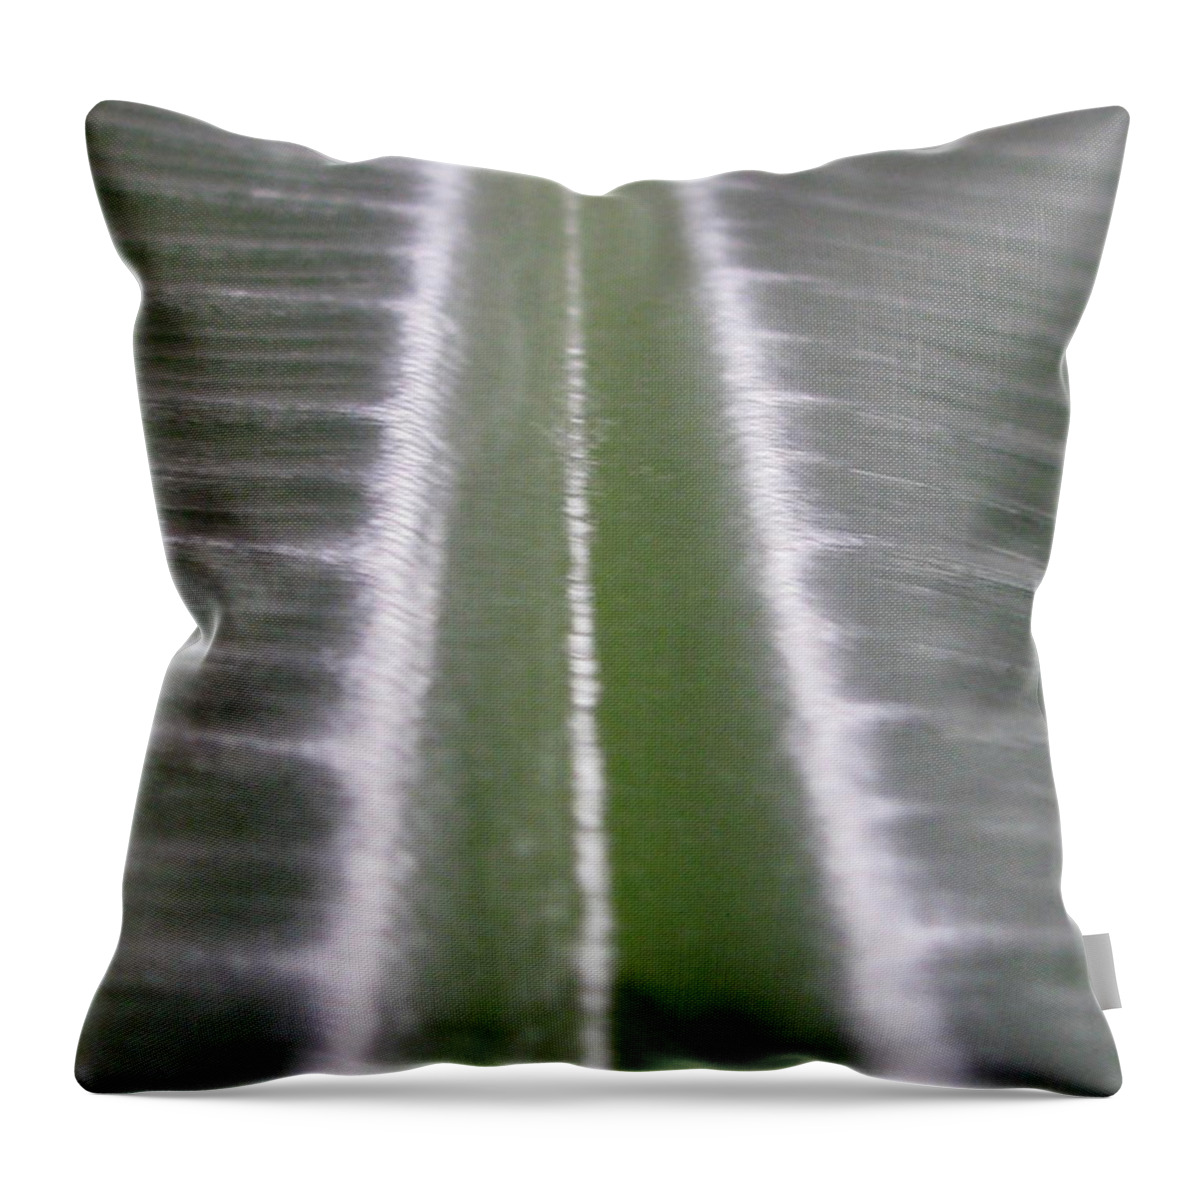 Flower Throw Pillow featuring the photograph Elongating by Tina Marie